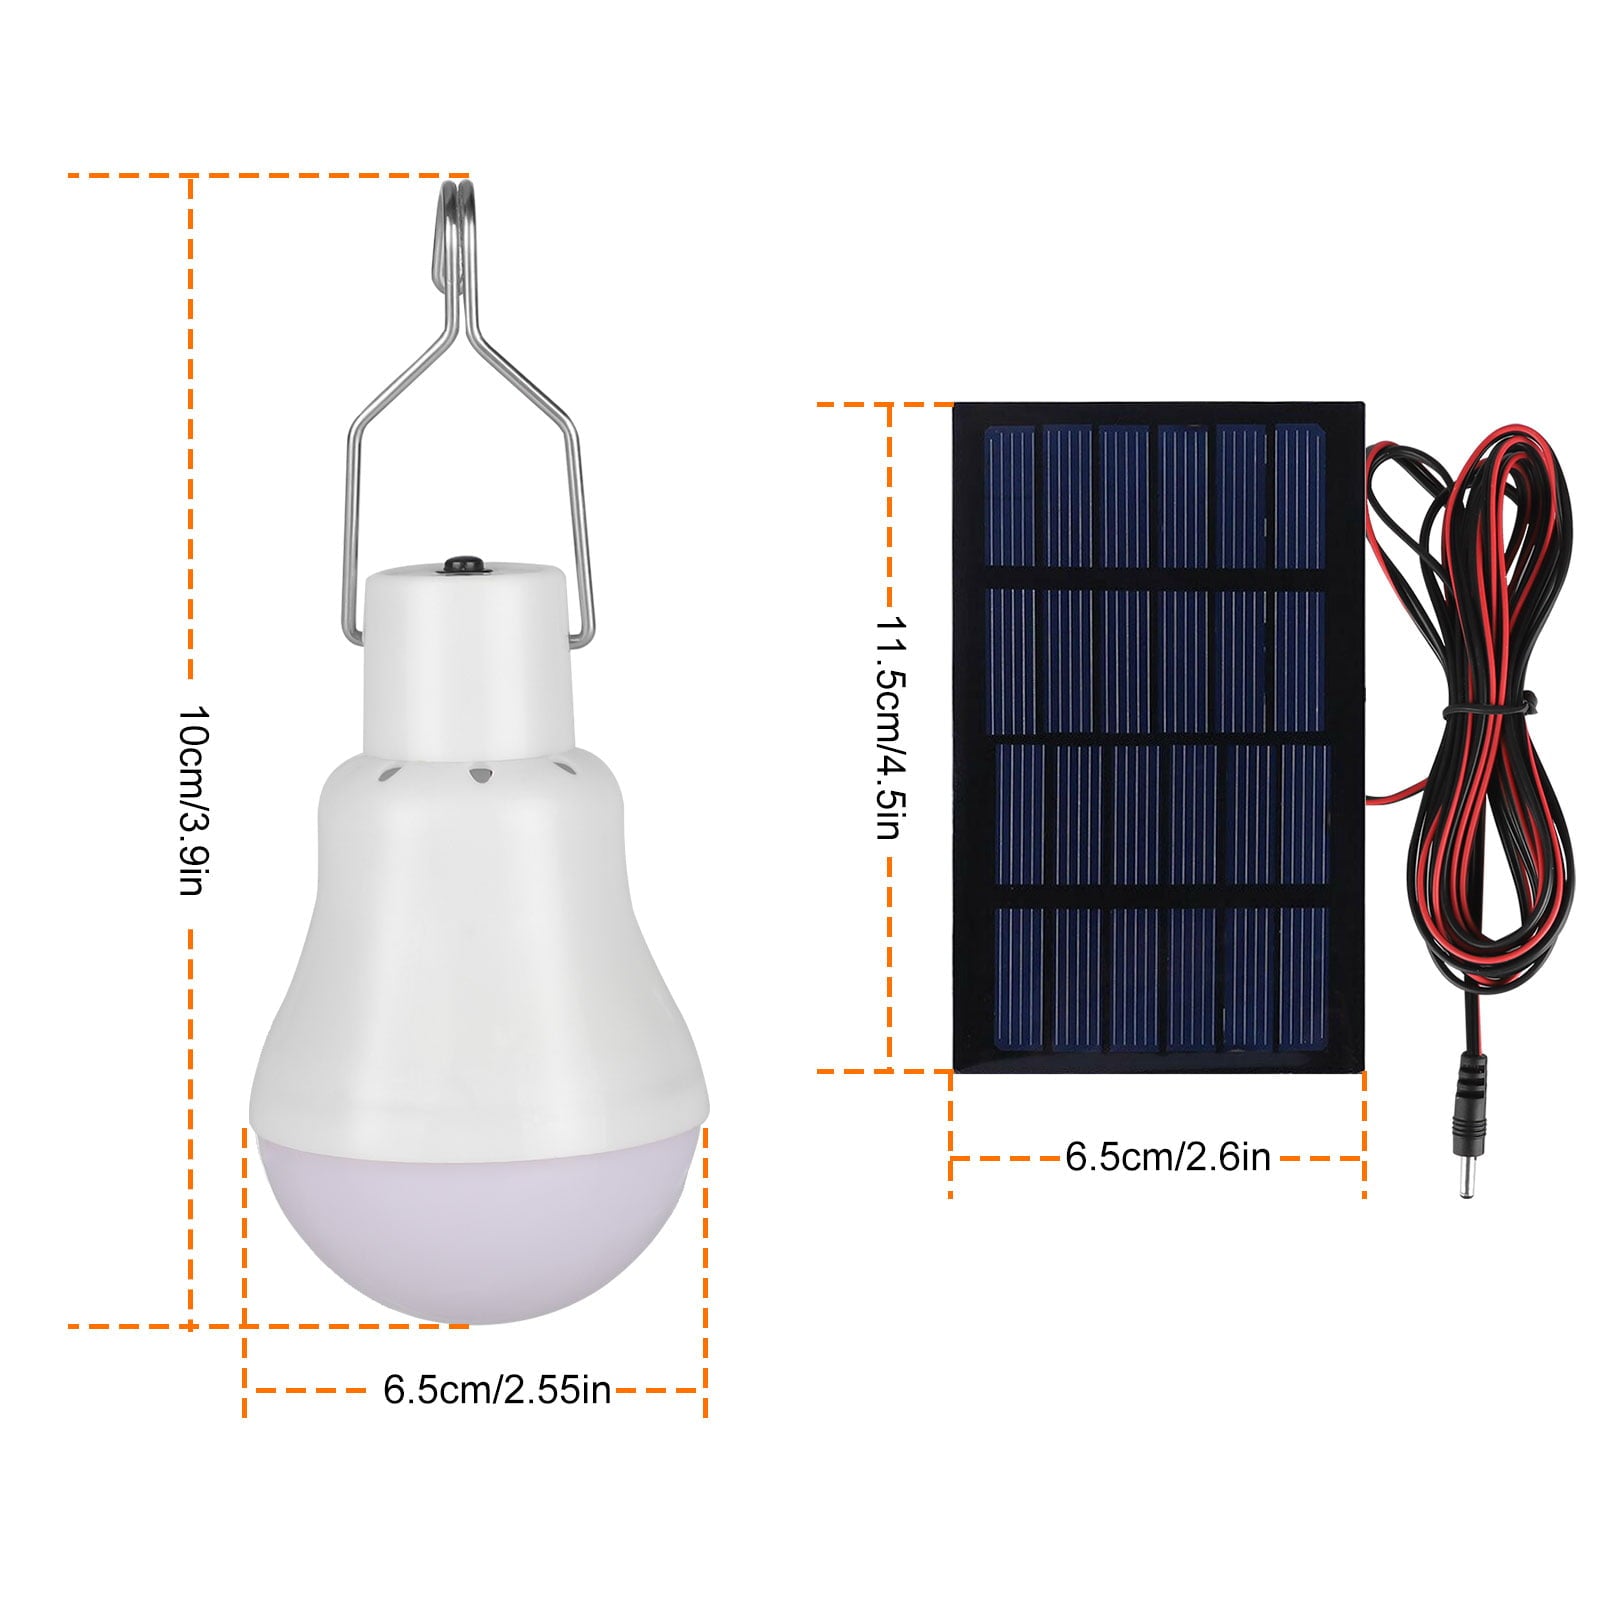 Portable Solar Powered LED Bulb Light， PASEO Outdoor Rechargeable Solar Energy Panel Lamp Lighting for Hiking Fishing Camping Tent Indoor Home Chicken Coop Shed， Emergency Lights， White